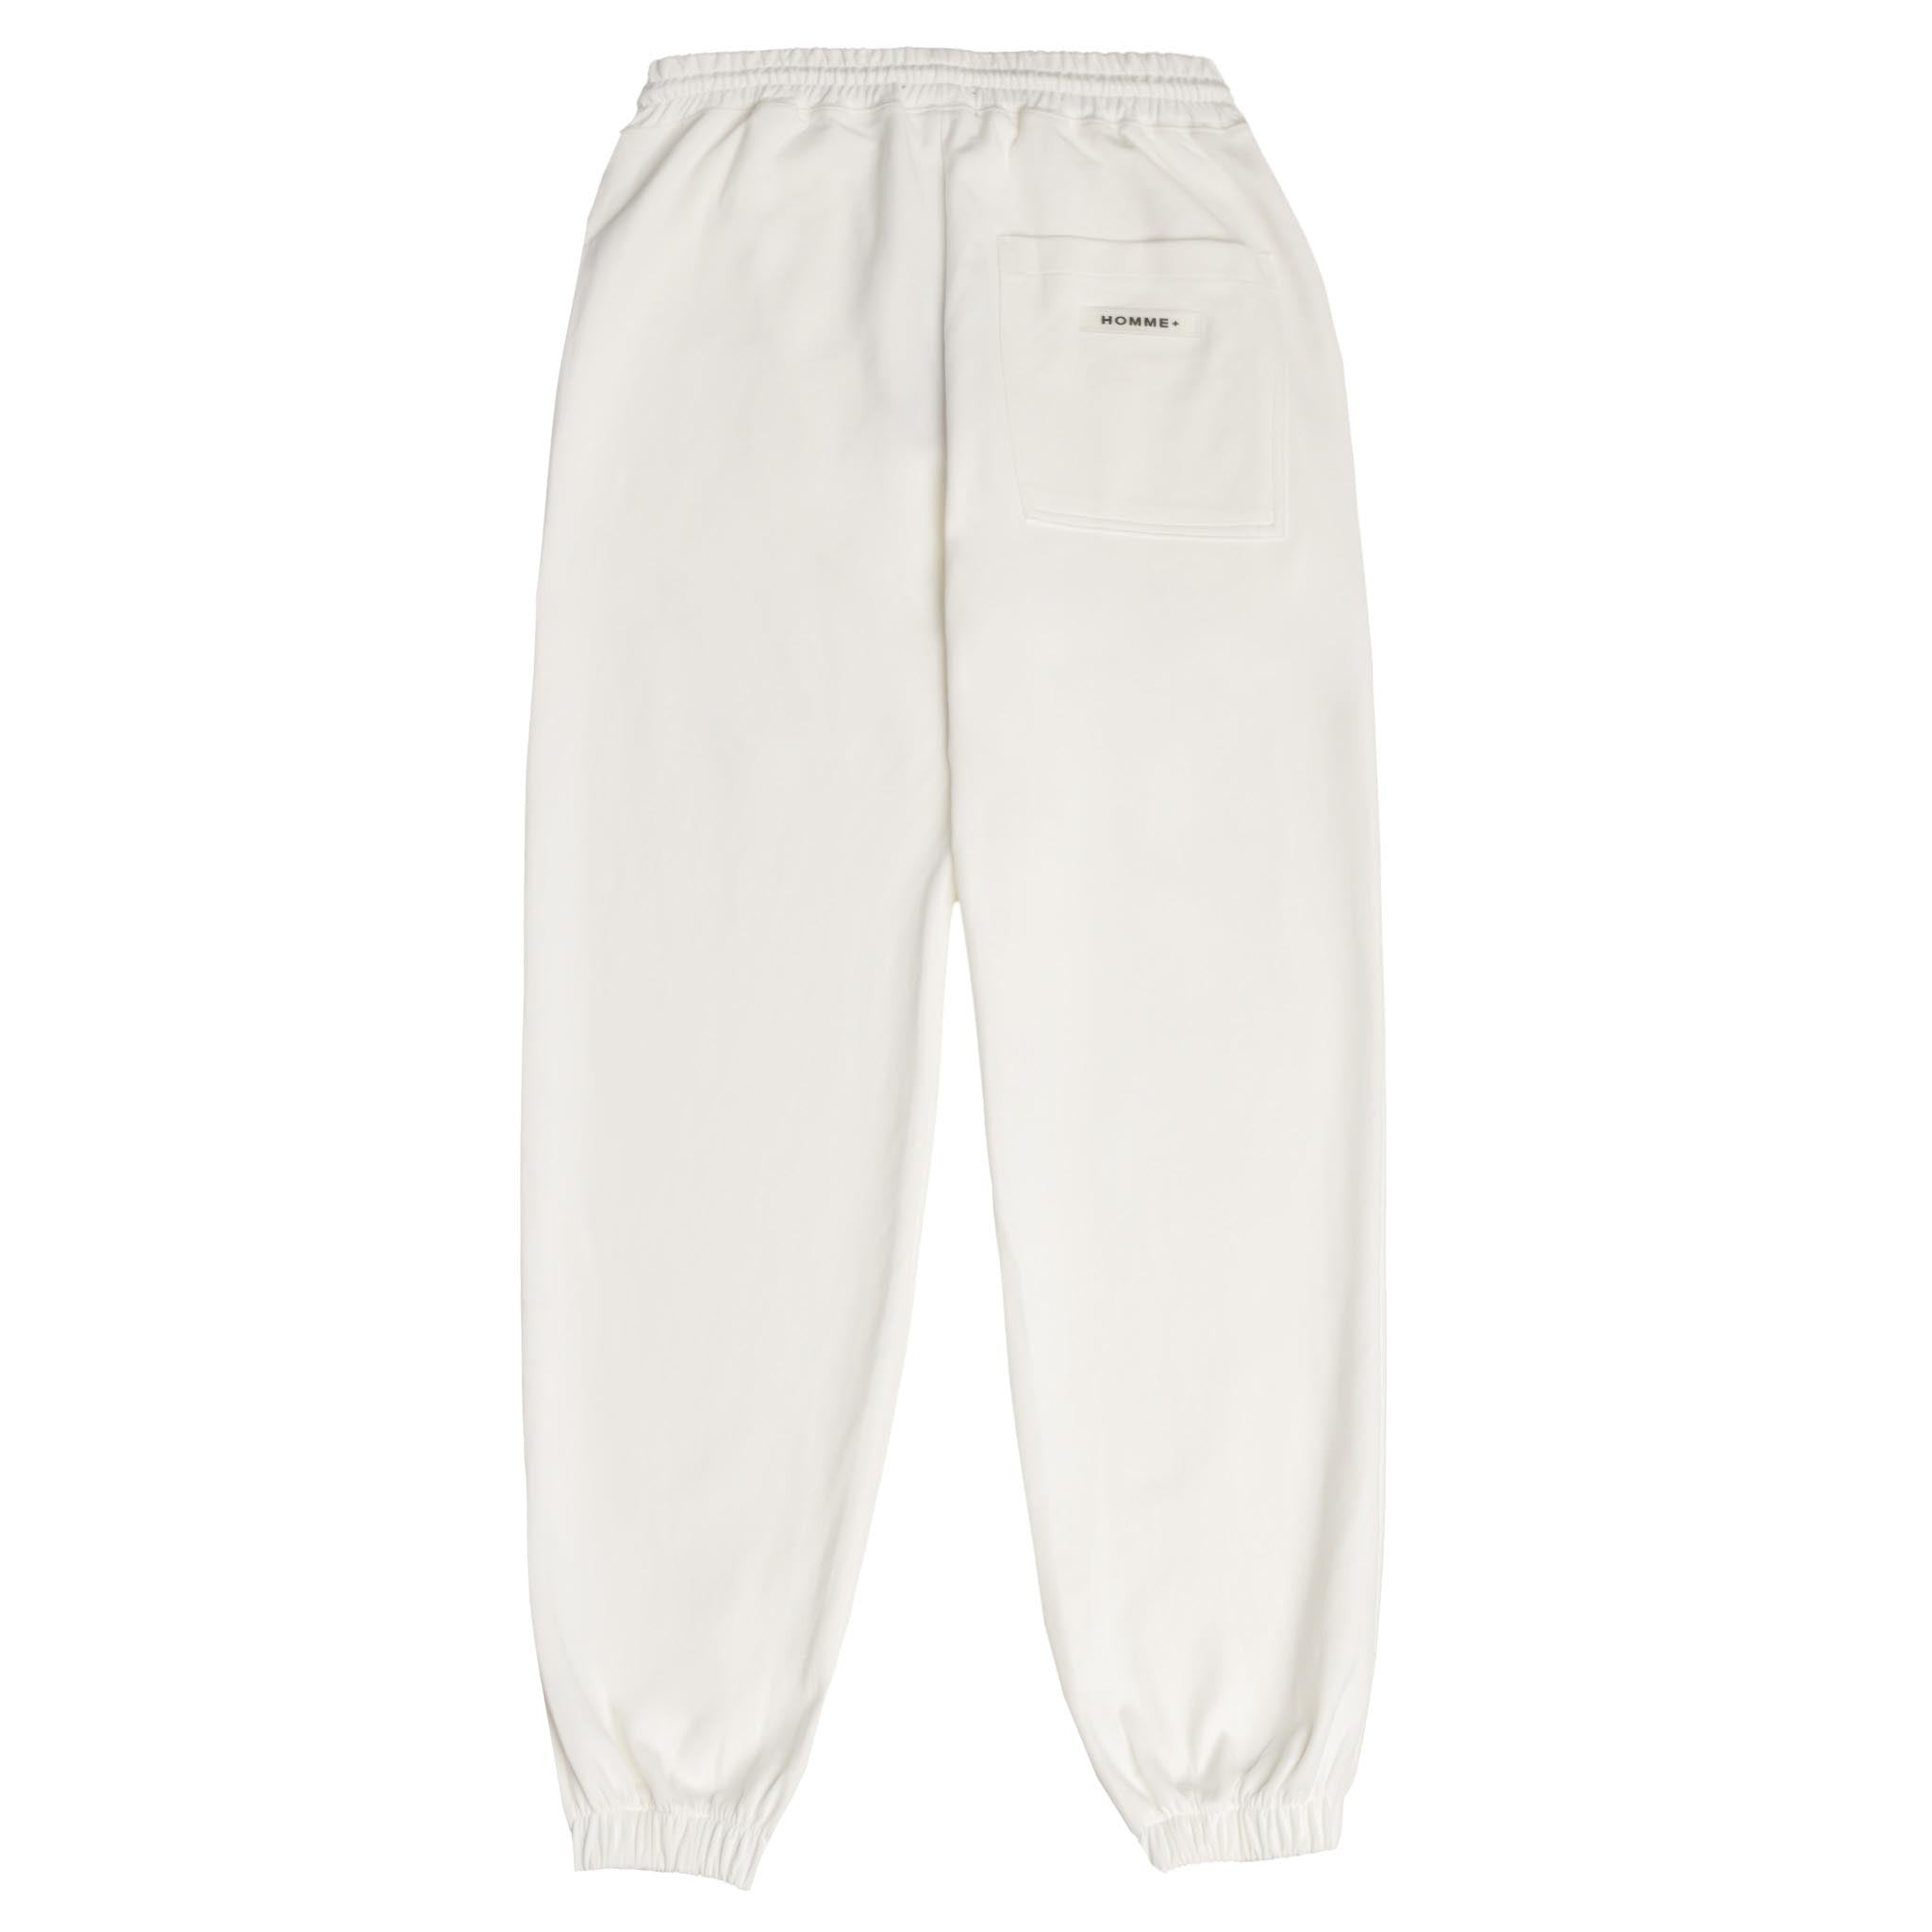 HOMME+ Essentials Jogger Off White